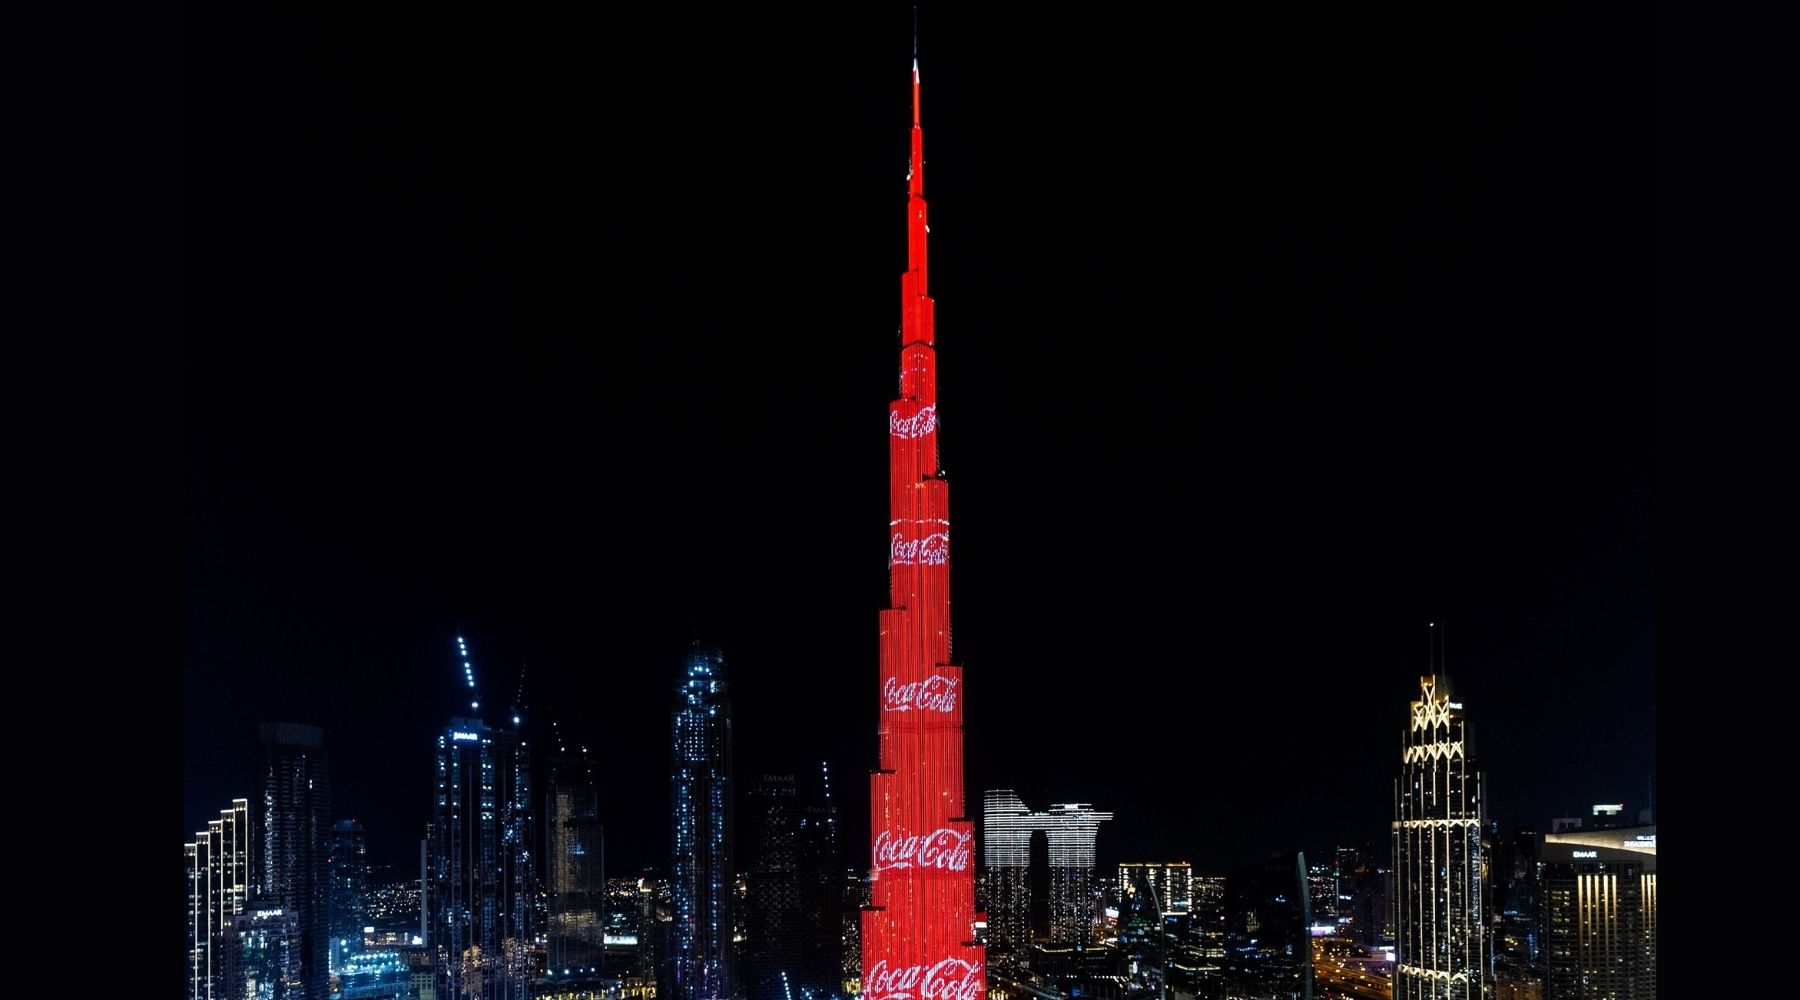 Coca-Cola Lights up Burj Khalifa to Introduce New Global Brand Philosophy & Identity in the MENA